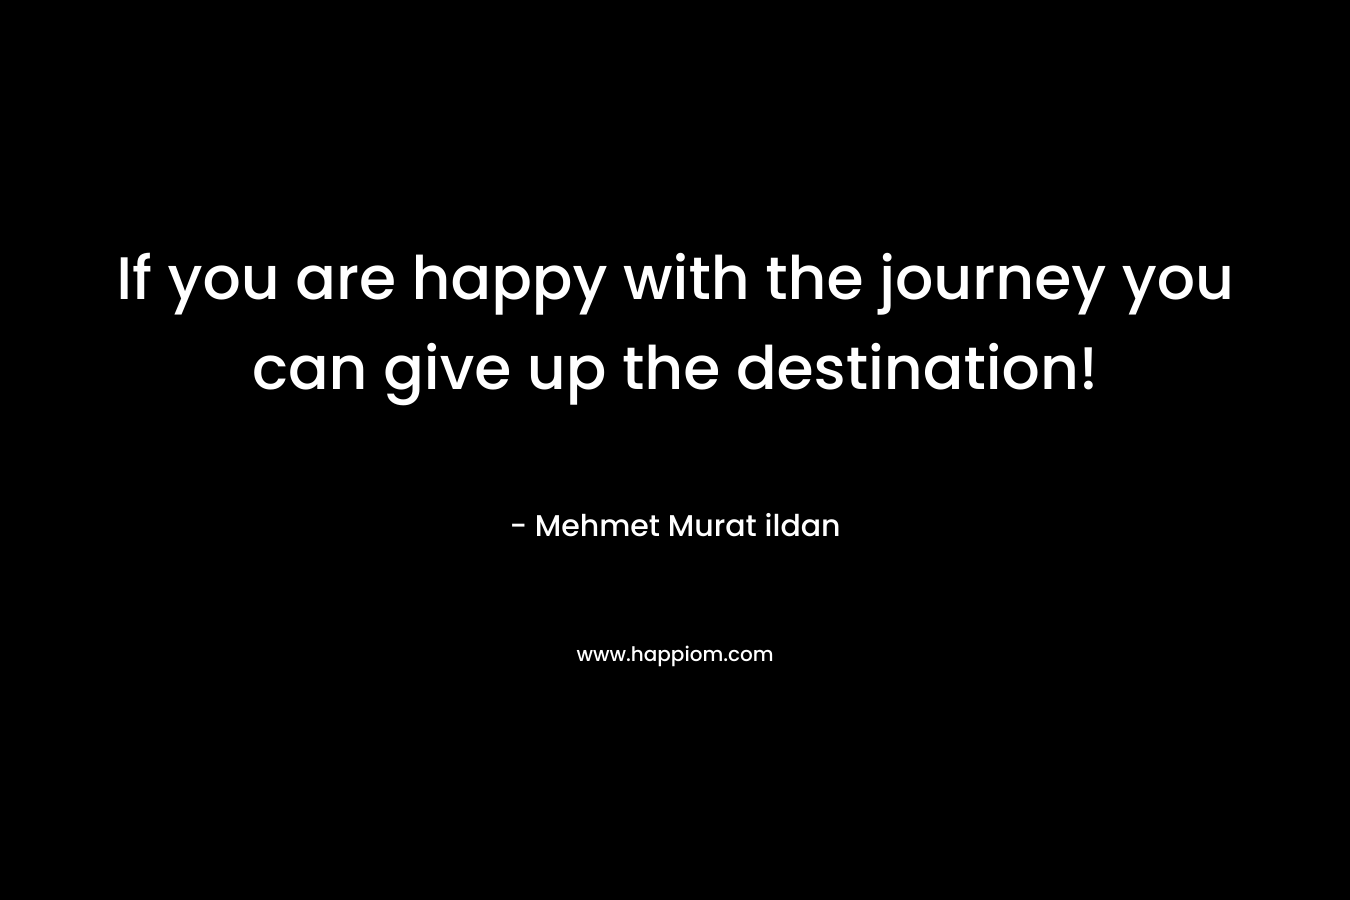 If you are happy with the journey you can give up the destination!